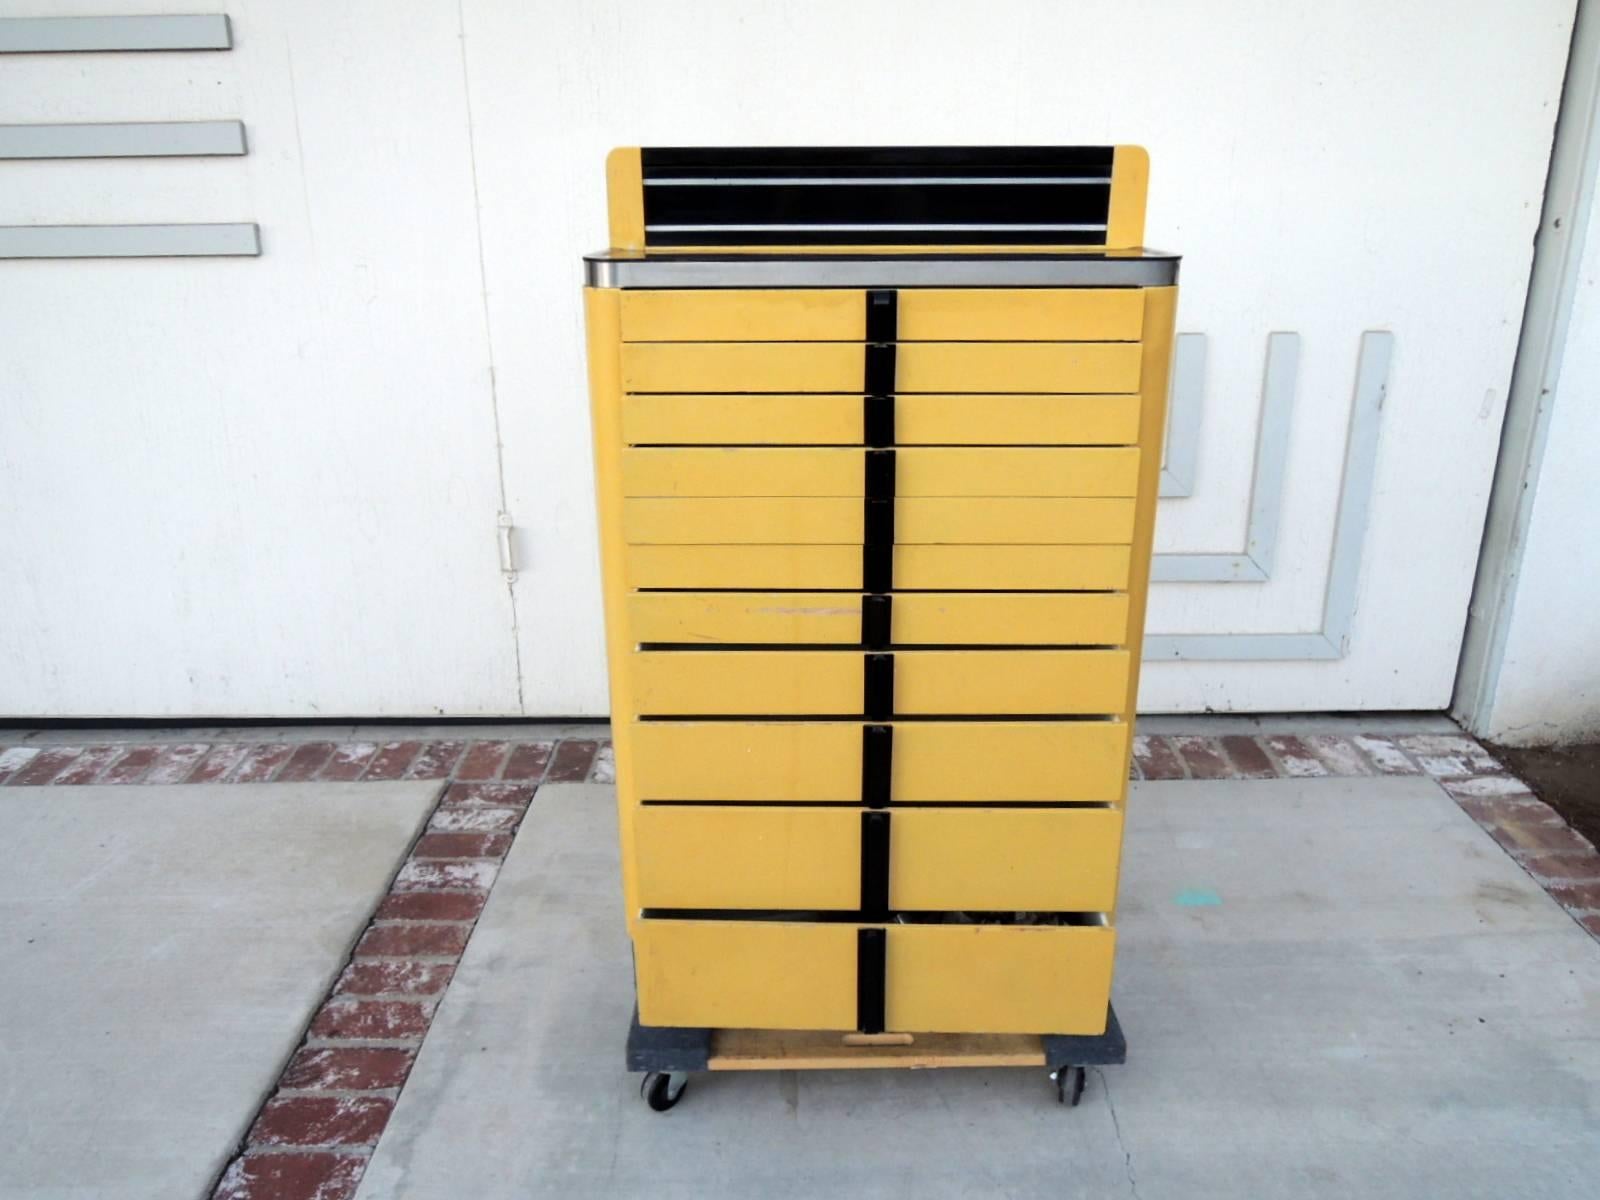 Fantastic Art Deco dental cabinet made by the American Cabinet Company, USA. There are black plastic handles and a painted yellow enamel frame and drawers. There are ten drawers total and the fourth drawer down is a double drawer. The top area of